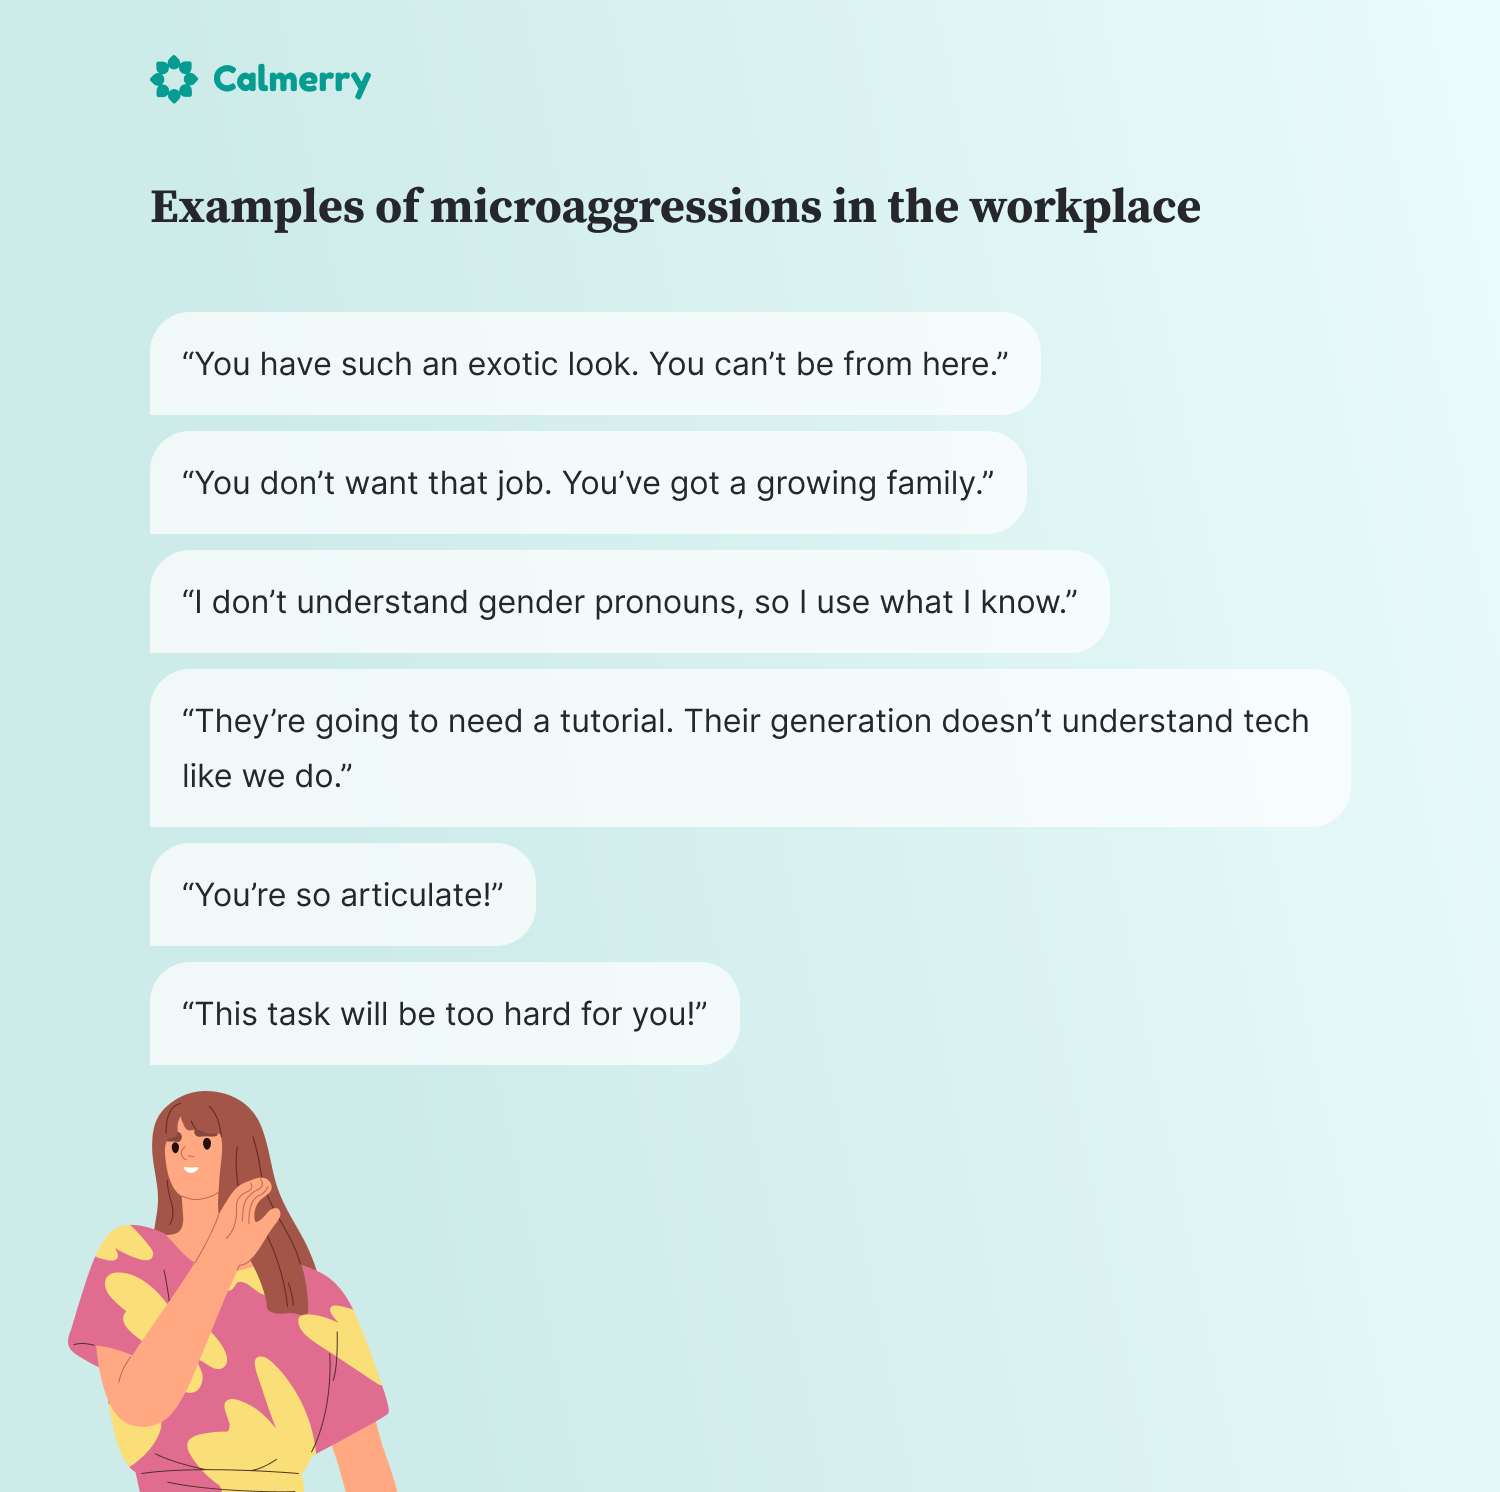 Examples of microaggressions in the workplace “You have such an exotic look. You can’t be from here.” “You don’t want that job. You’ve got a growing family.” “I don’t understand gender pronouns, so I use what I know.” “They’re going to need a tutorial. Their generation doesn’t understand tech like we do.” “You’re so articulate!” “This task will be too hard for you!”